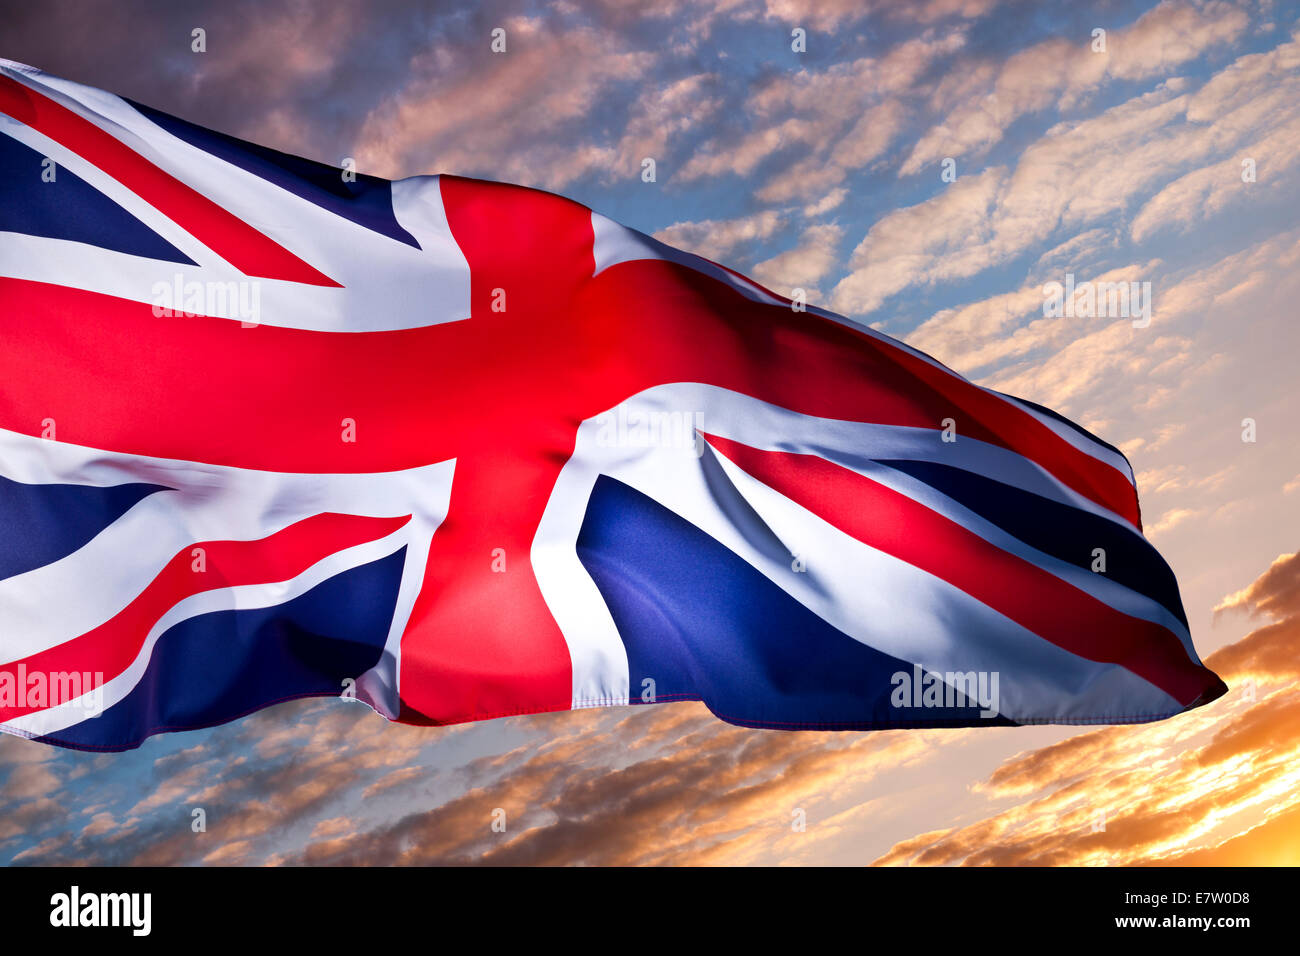 An image of a 'Union Jack' - Union Flag of Great Britain against a new dawn sunrise. Stock Photo